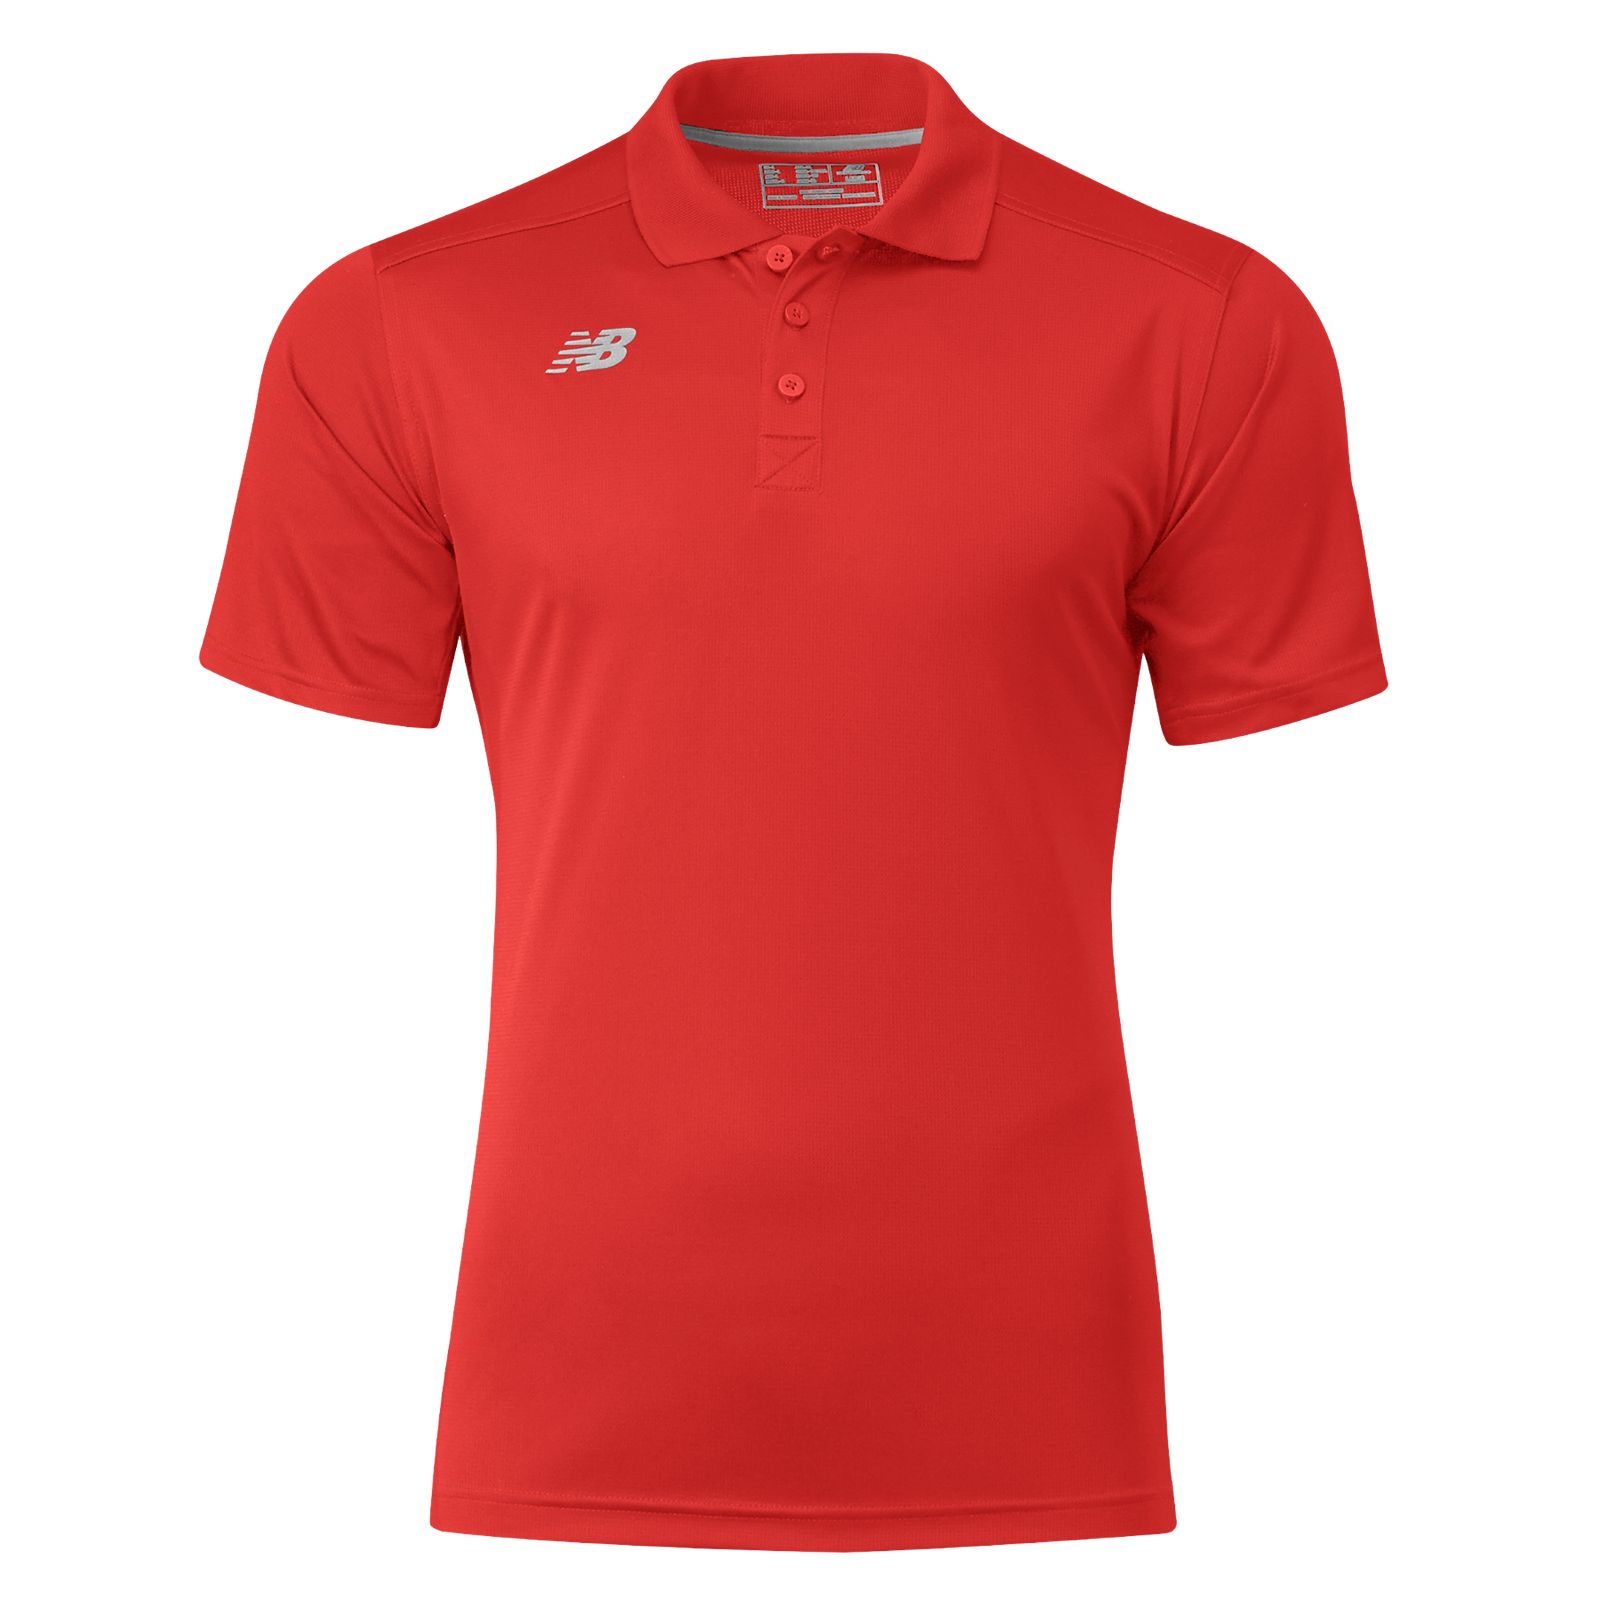 Men's Performance Tech Polo, Team Red image number 0